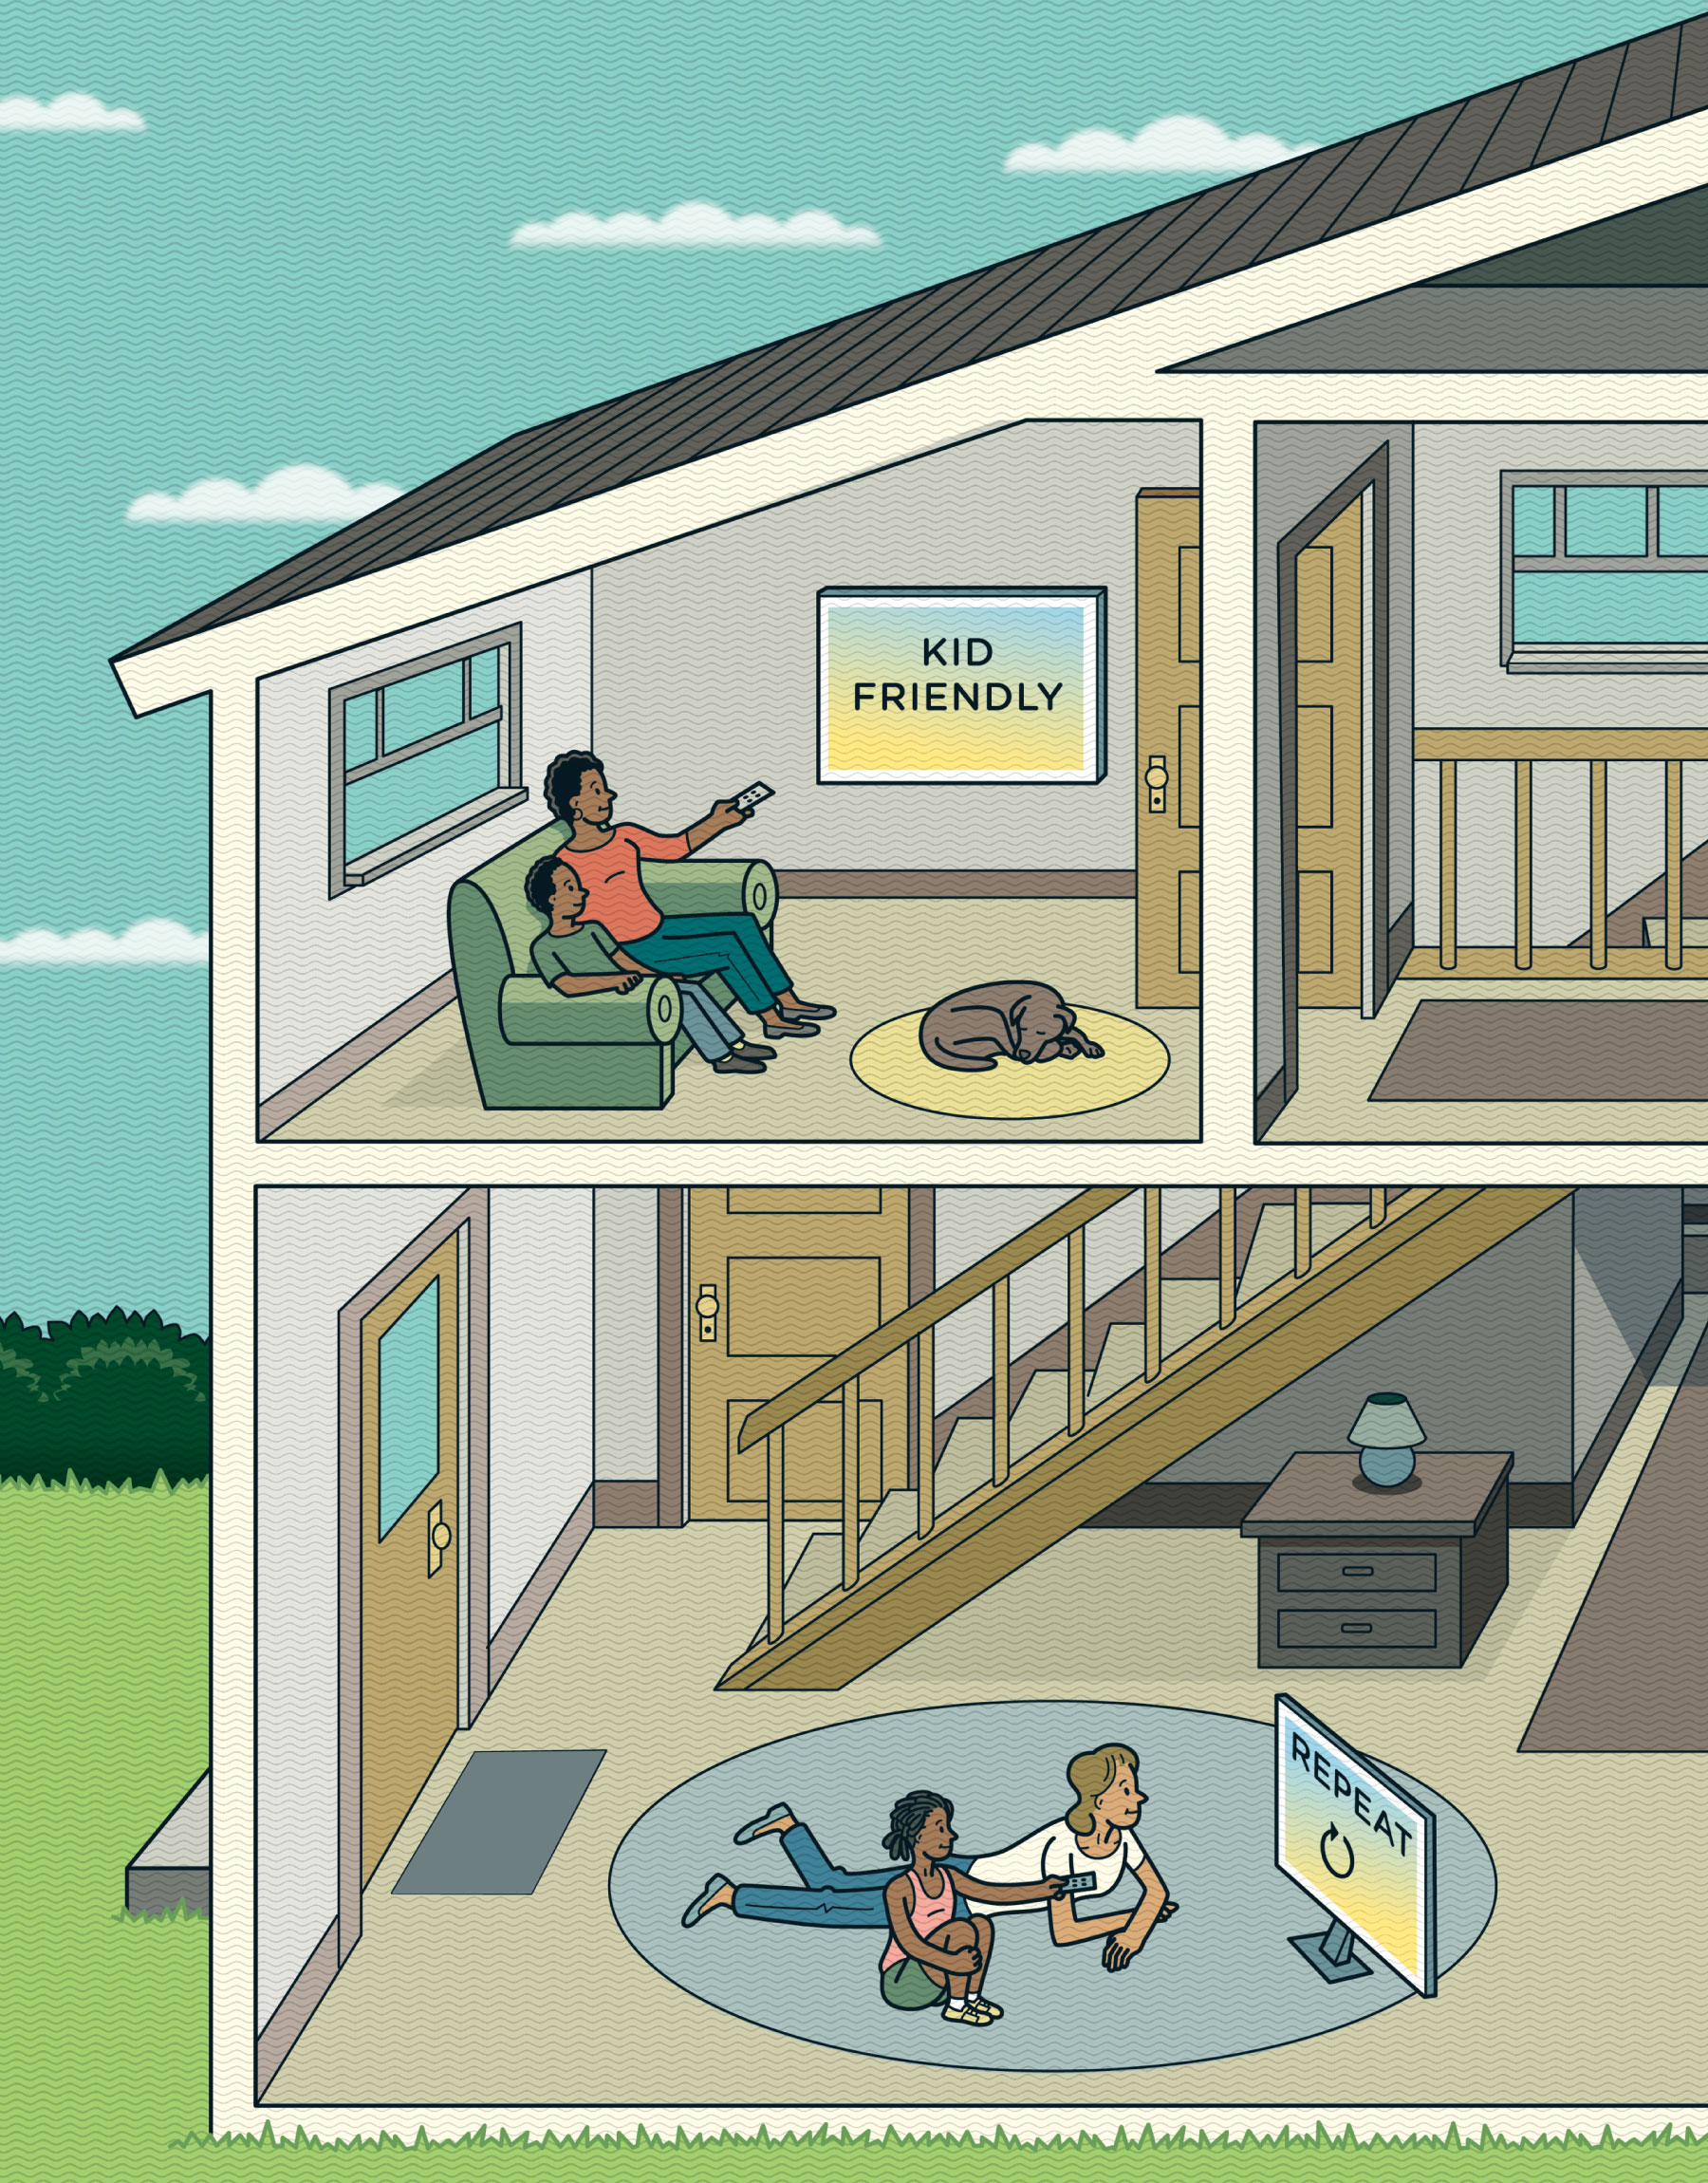 Illustration of an interior home with 2 families watching television